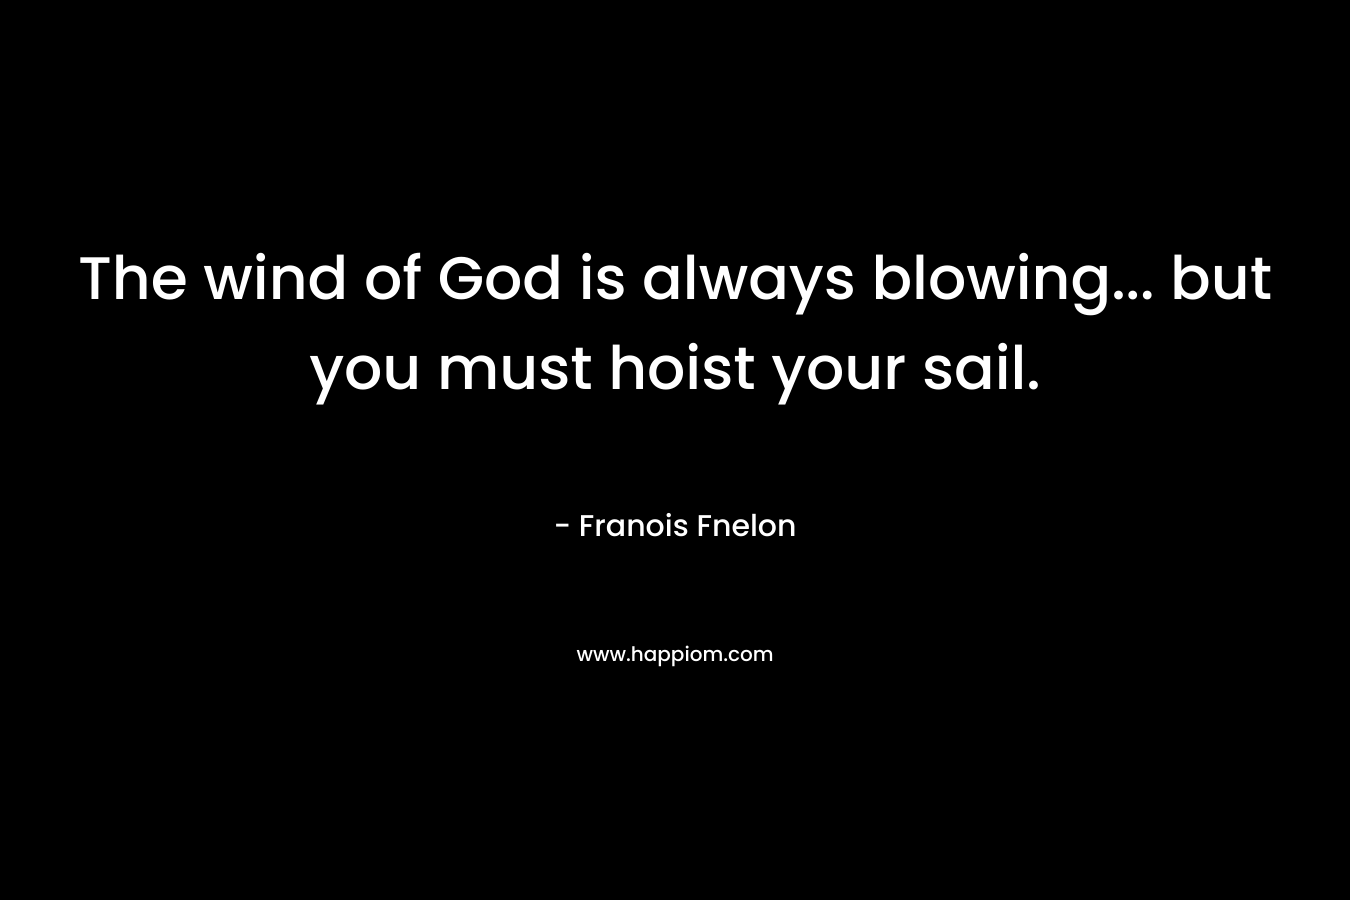 The wind of God is always blowing… but you must hoist your sail. – Franois Fnelon